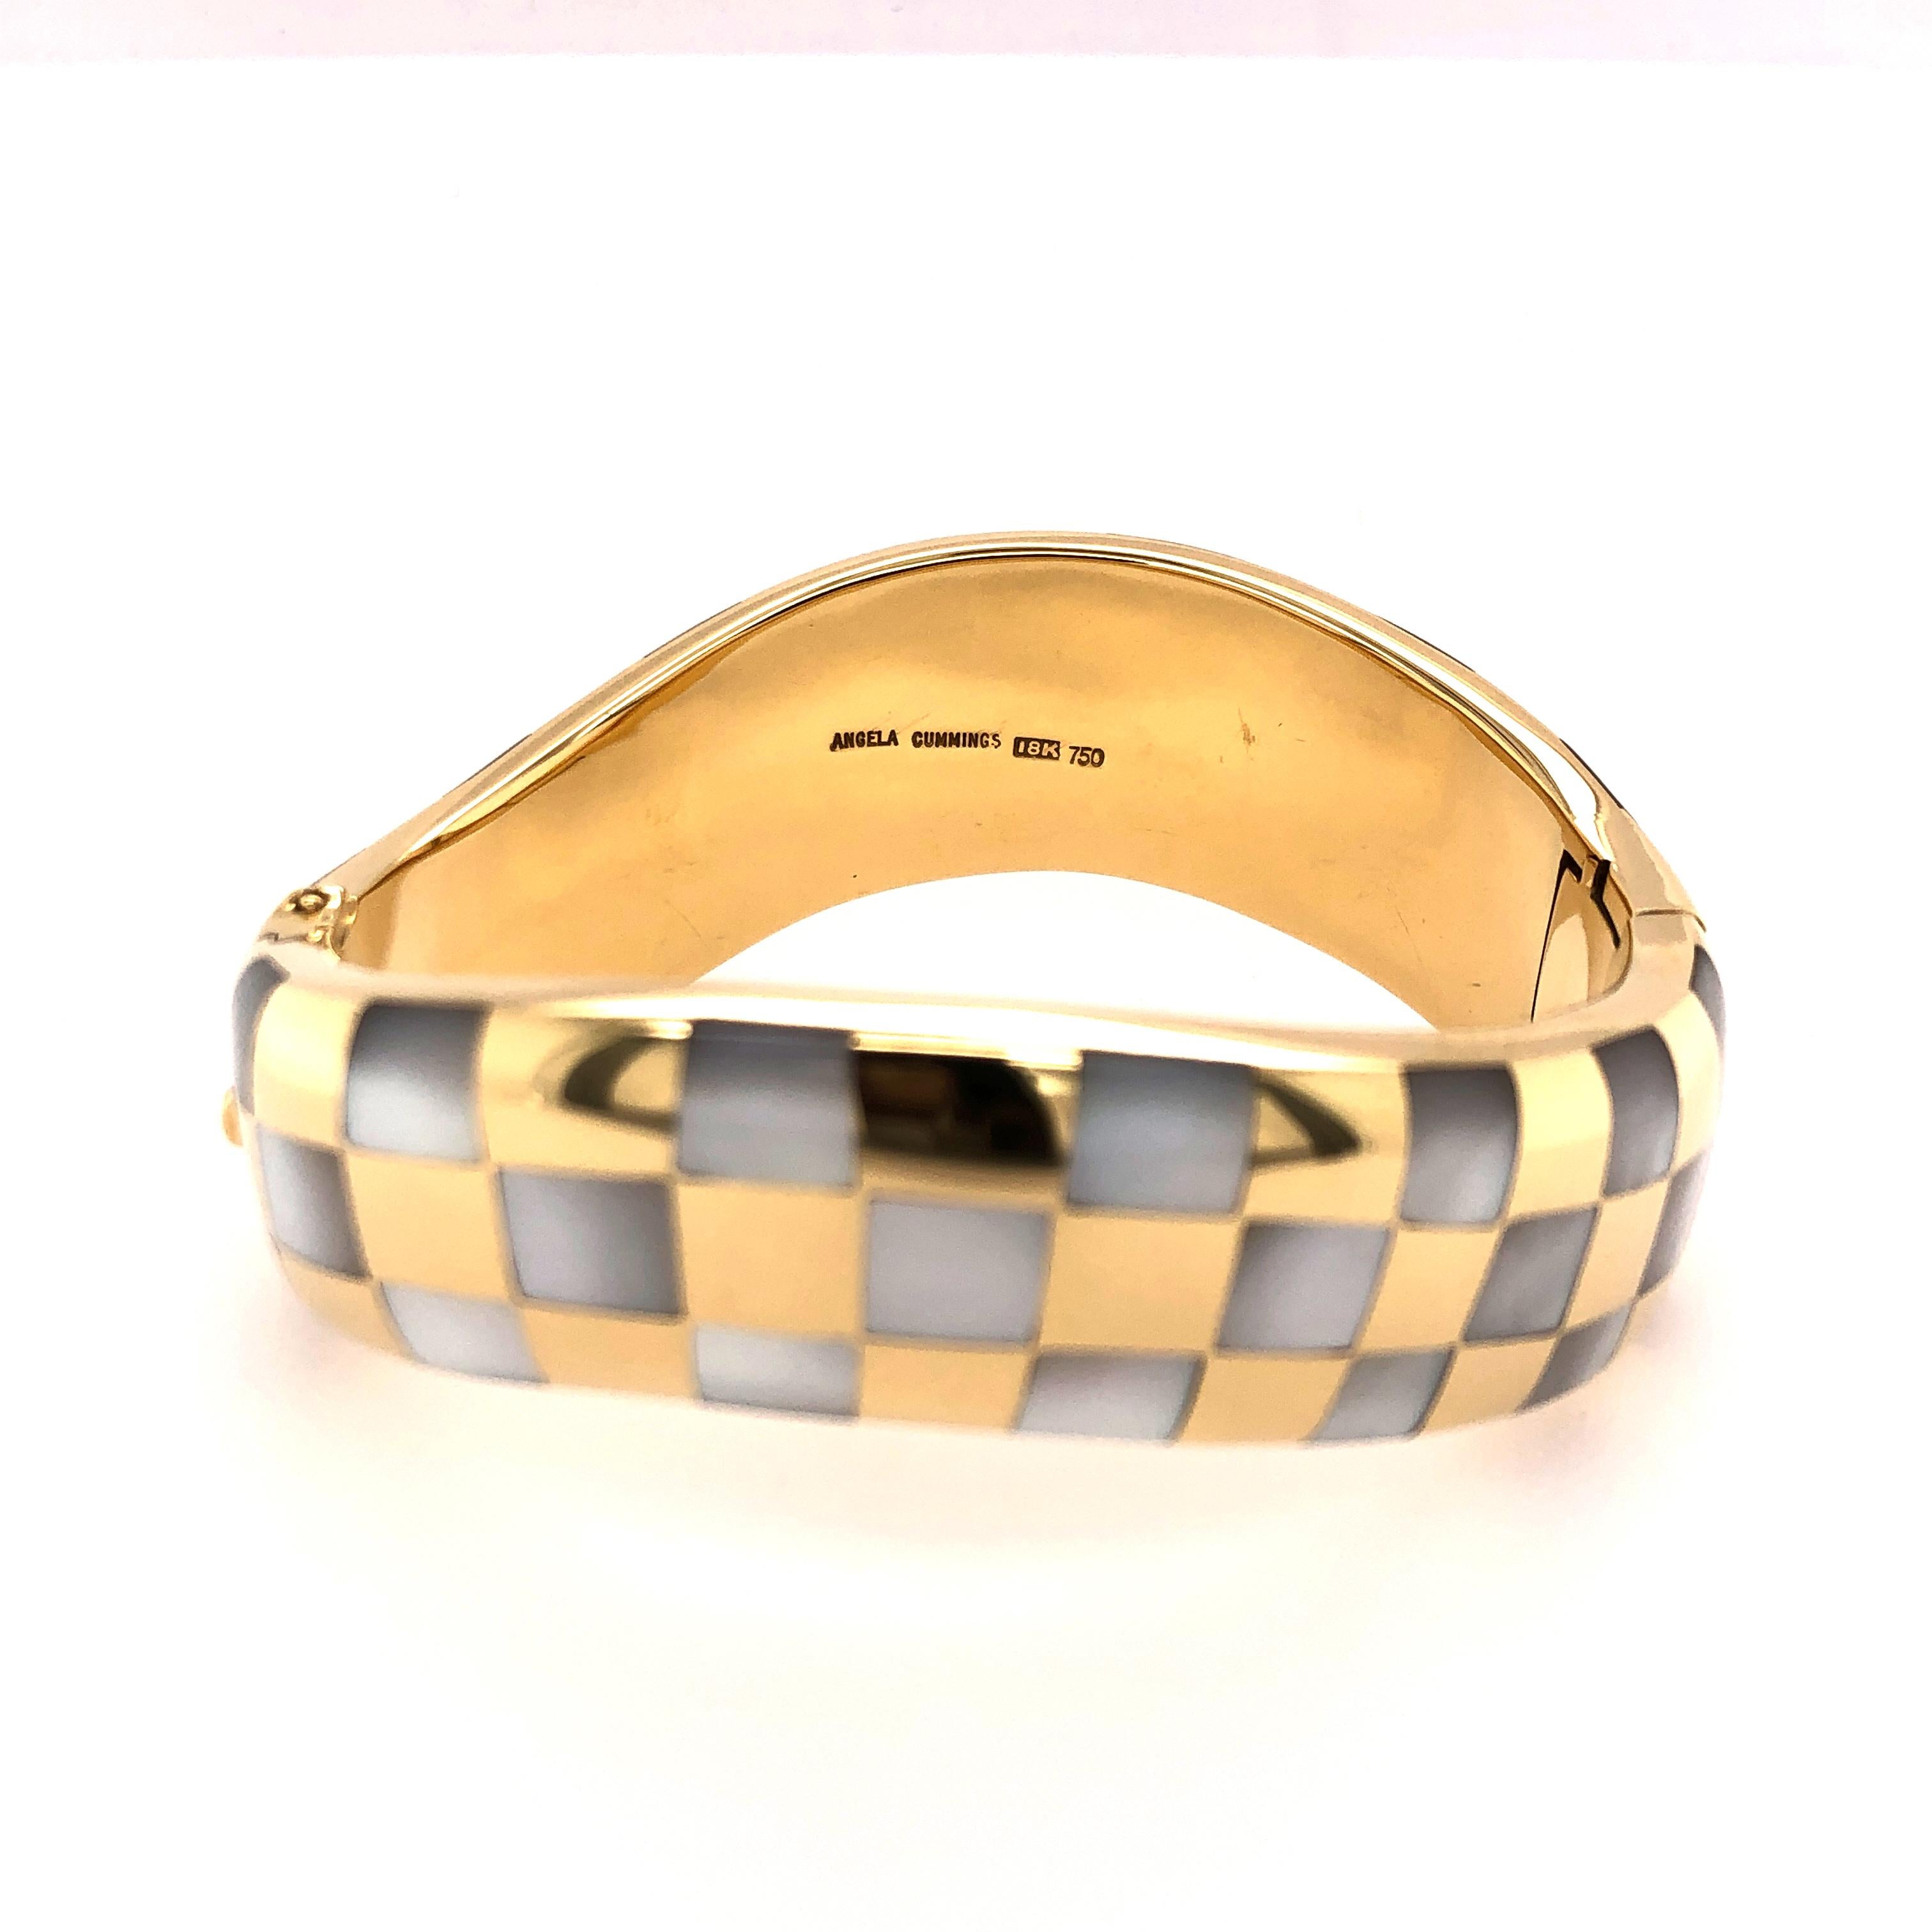 A wonderful collector's piece this bracelet from Angela Cummings is and exquisite piece of work. The inlaid Mother-of-Pearl creates a pleasant checker board pattern that follows the undulations of the bracelet. A mixture of strength and softness it